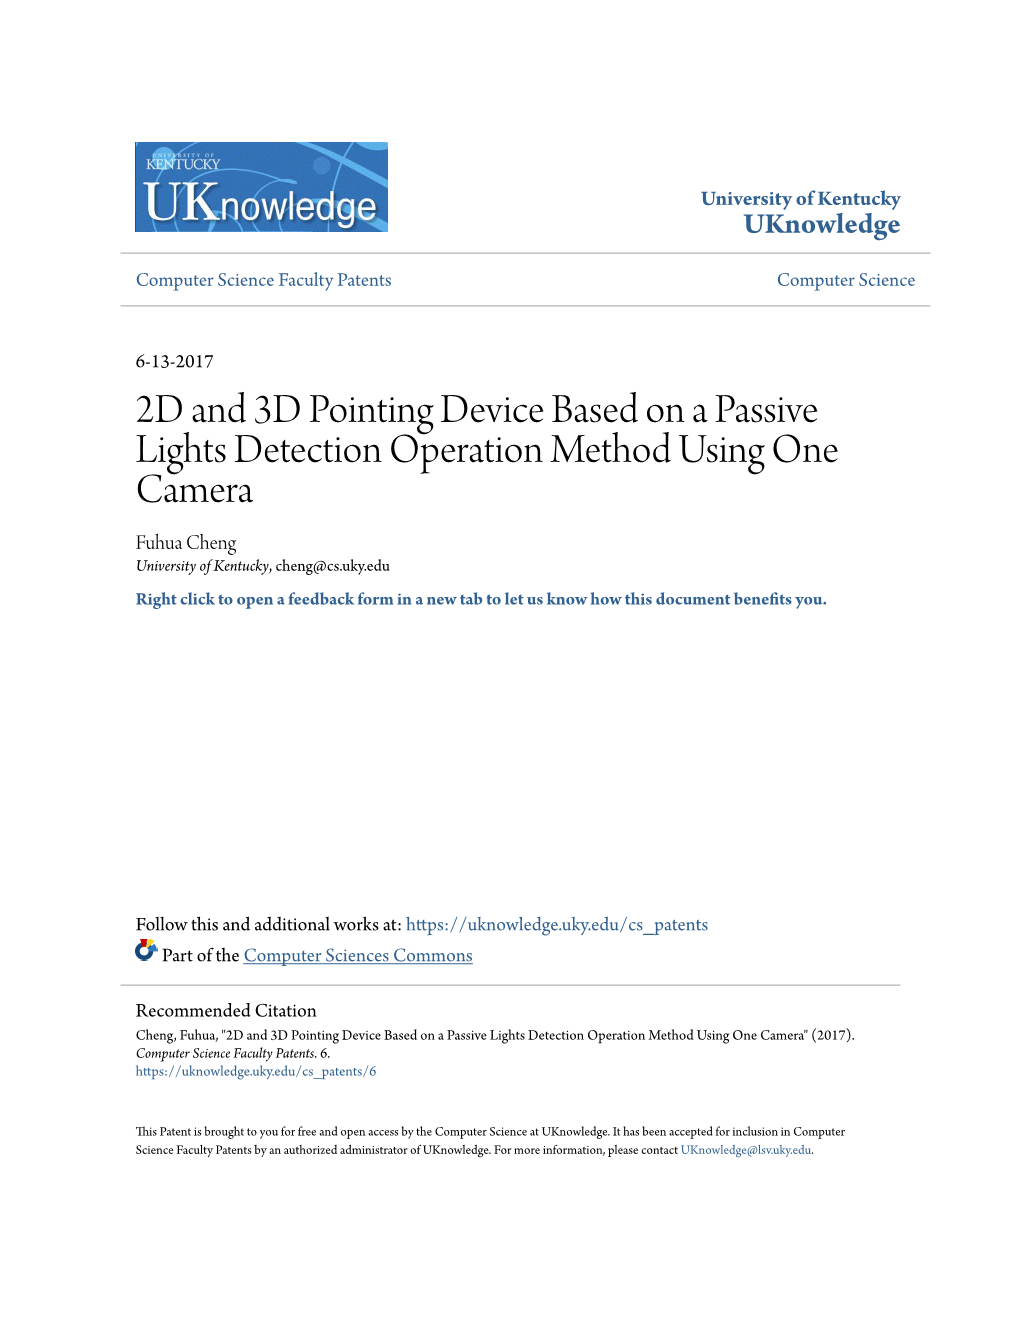 2D and 3D Pointing Device Based on a Passive Lights Detection